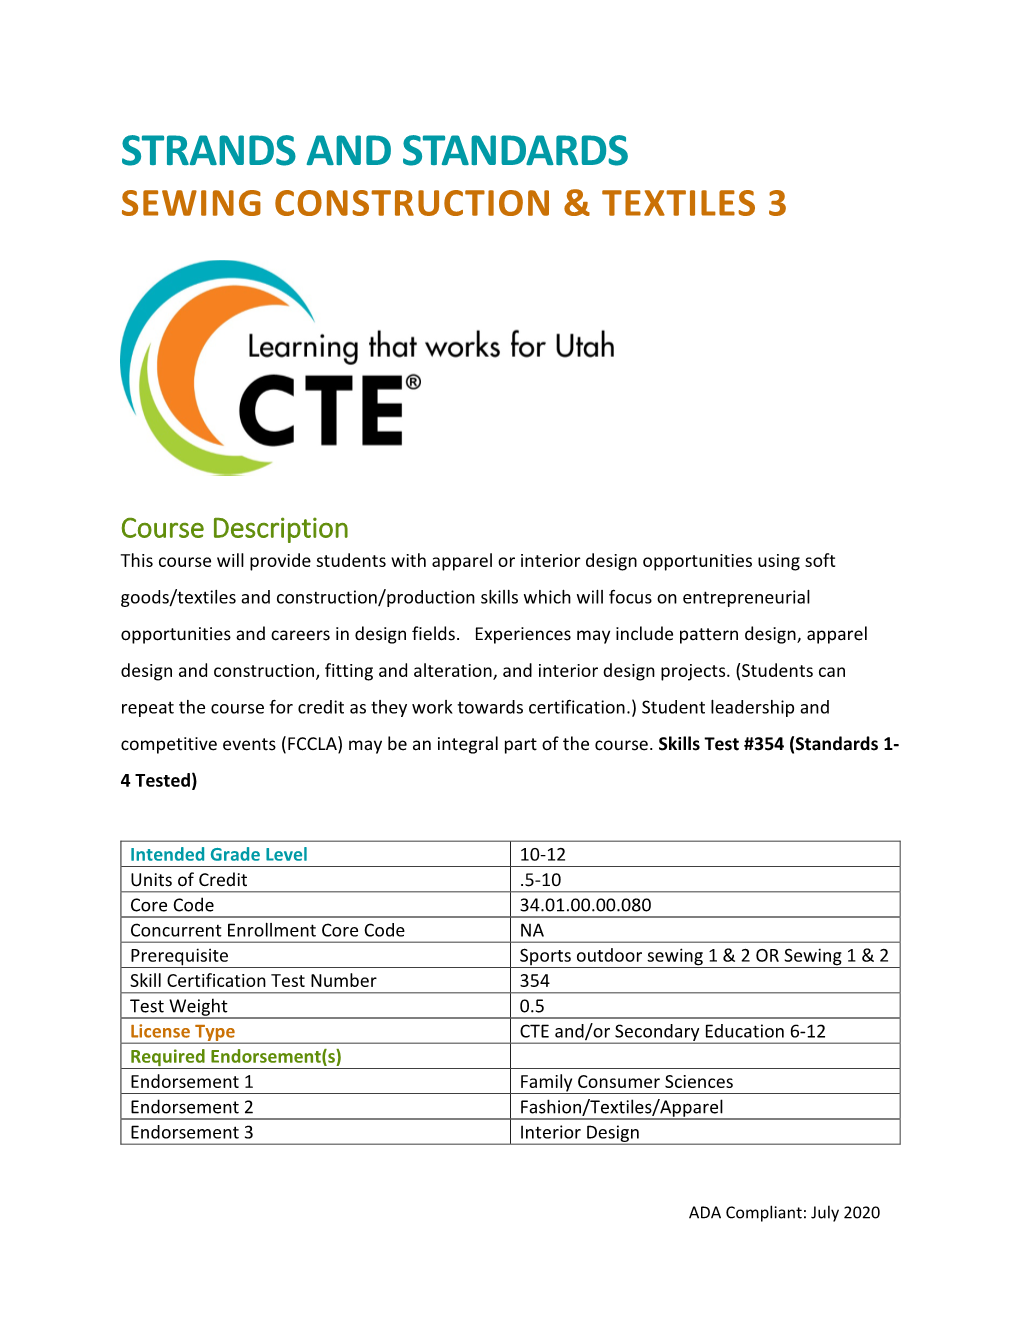 Strands and Standards Sewing Construction & Textiles 3